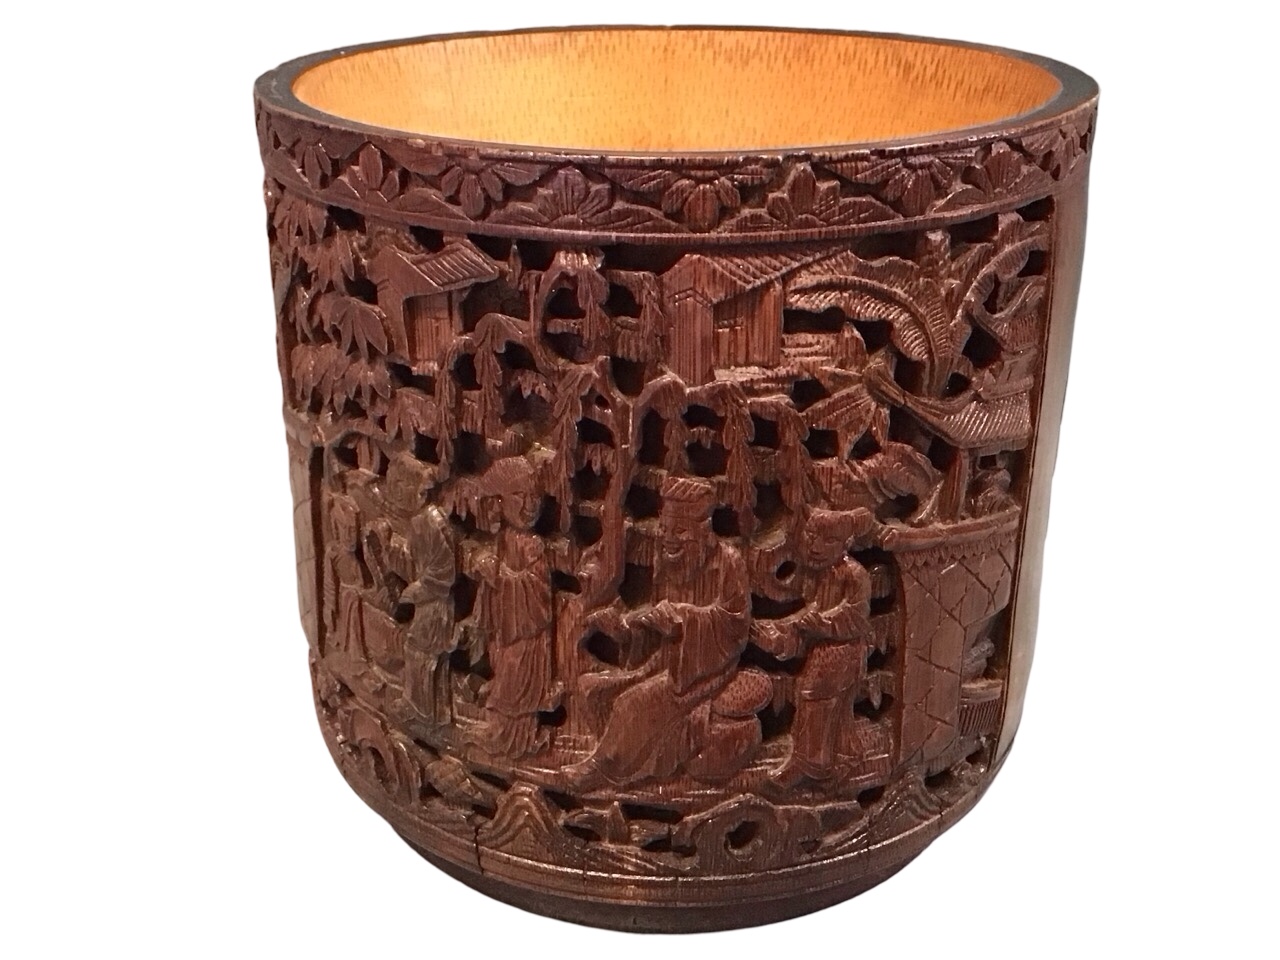 A C19th Chinese bamboo brush pot carved with panels of phoenixes, warriors and courtly figures in